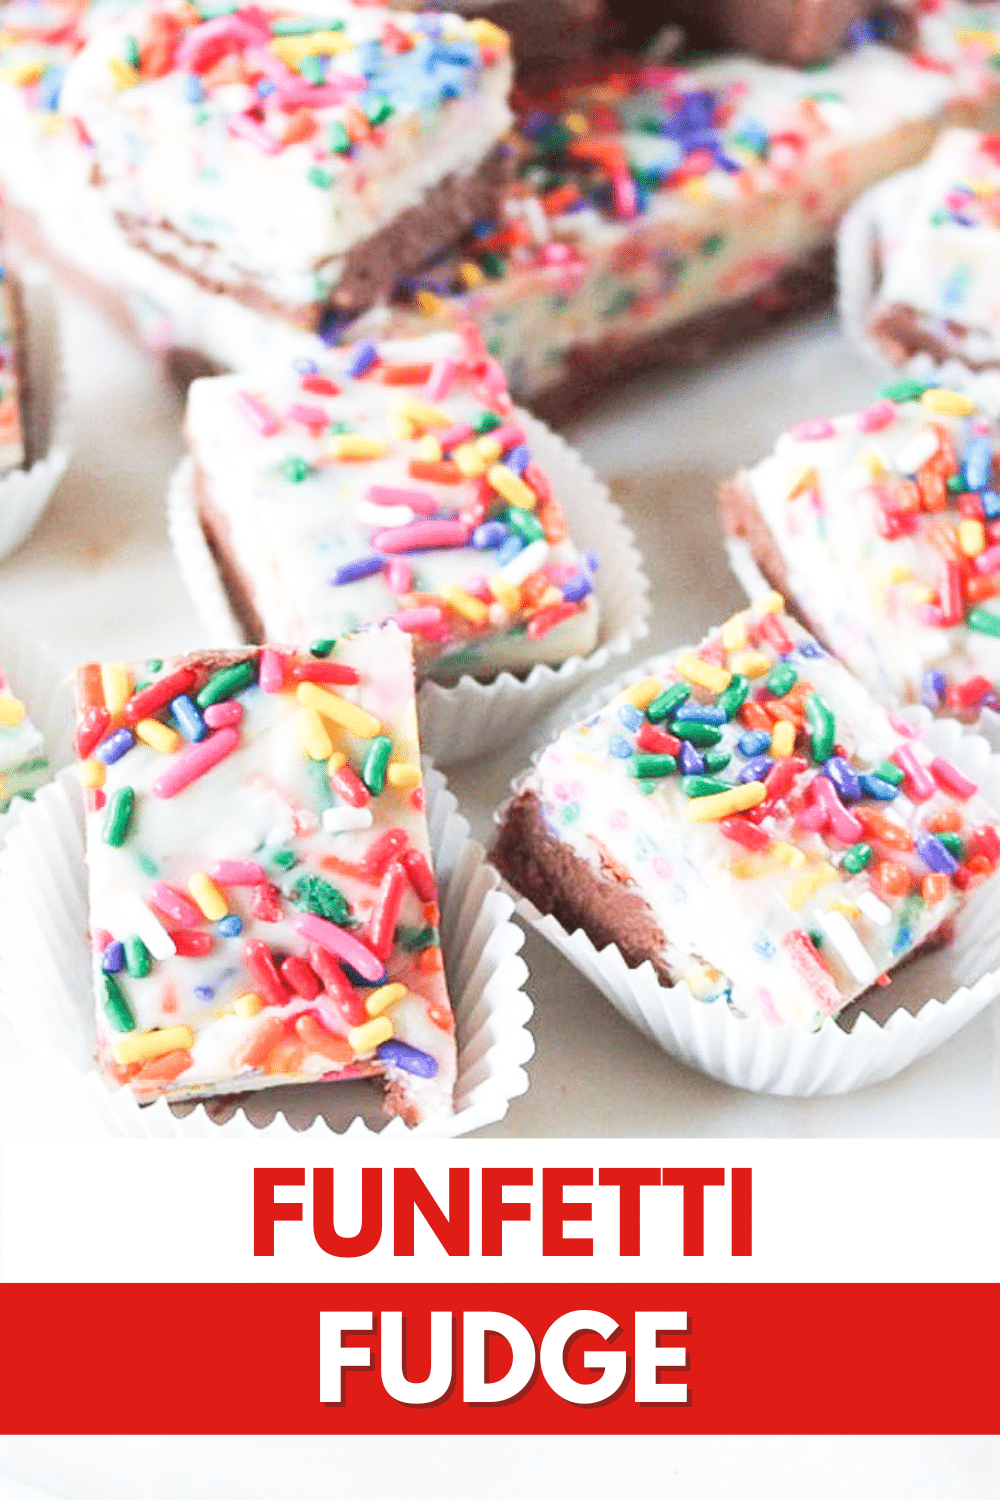 Funfetti fudge with sprinkle topping.